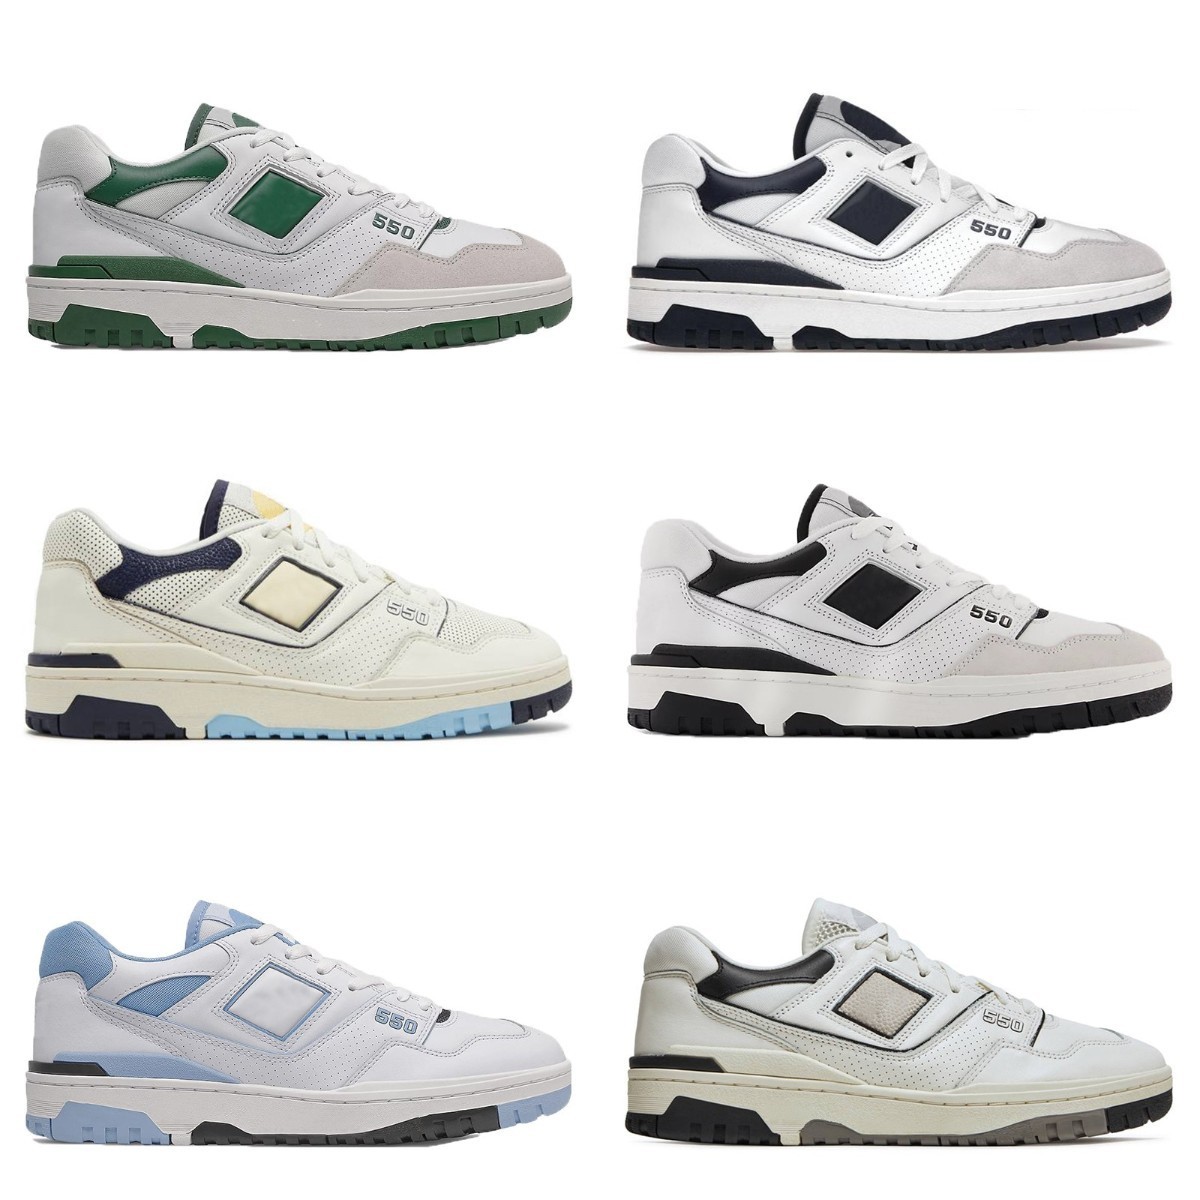 

Designer New BB550 B550 550 Casual Shoes Mens Women White Green Grey Cream Black Blue Yellow UNC Navy Purple Shadow Syracuse Burgundy Cyan AURALEE Trainer Sneakers S2, Please contact us